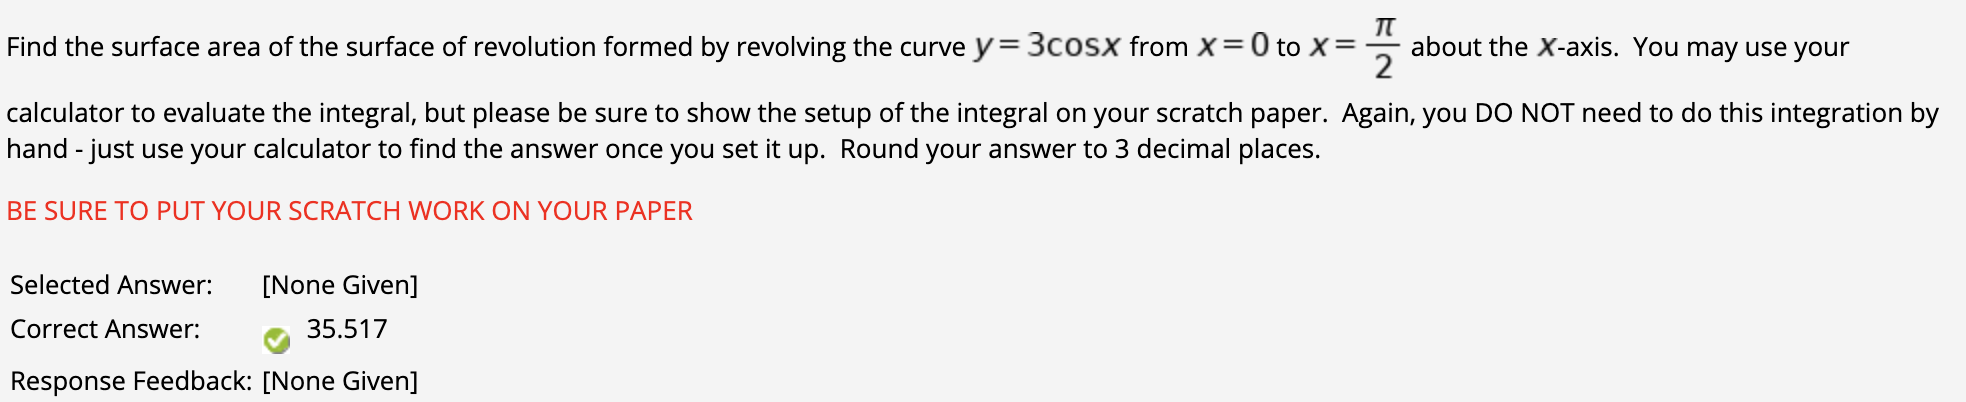 Find the surface area of the surface of revolution formed by revolving the curve y= 3cosX from X=0 to X=
about the X-axis.
2
